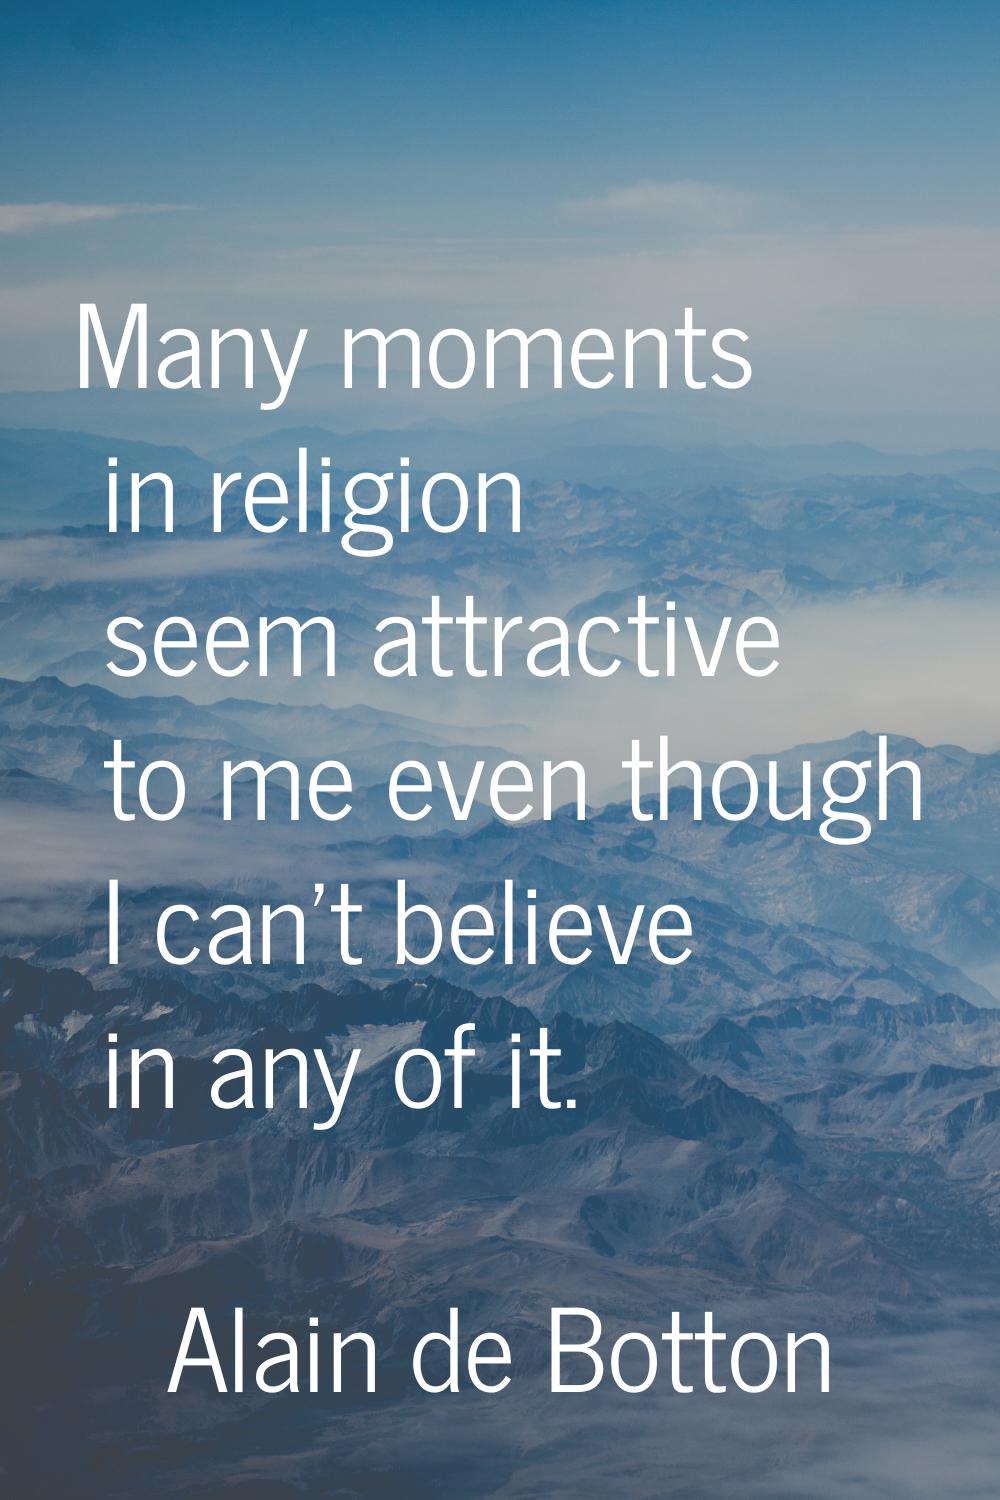 Many moments in religion seem attractive to me even though I can't believe in any of it.